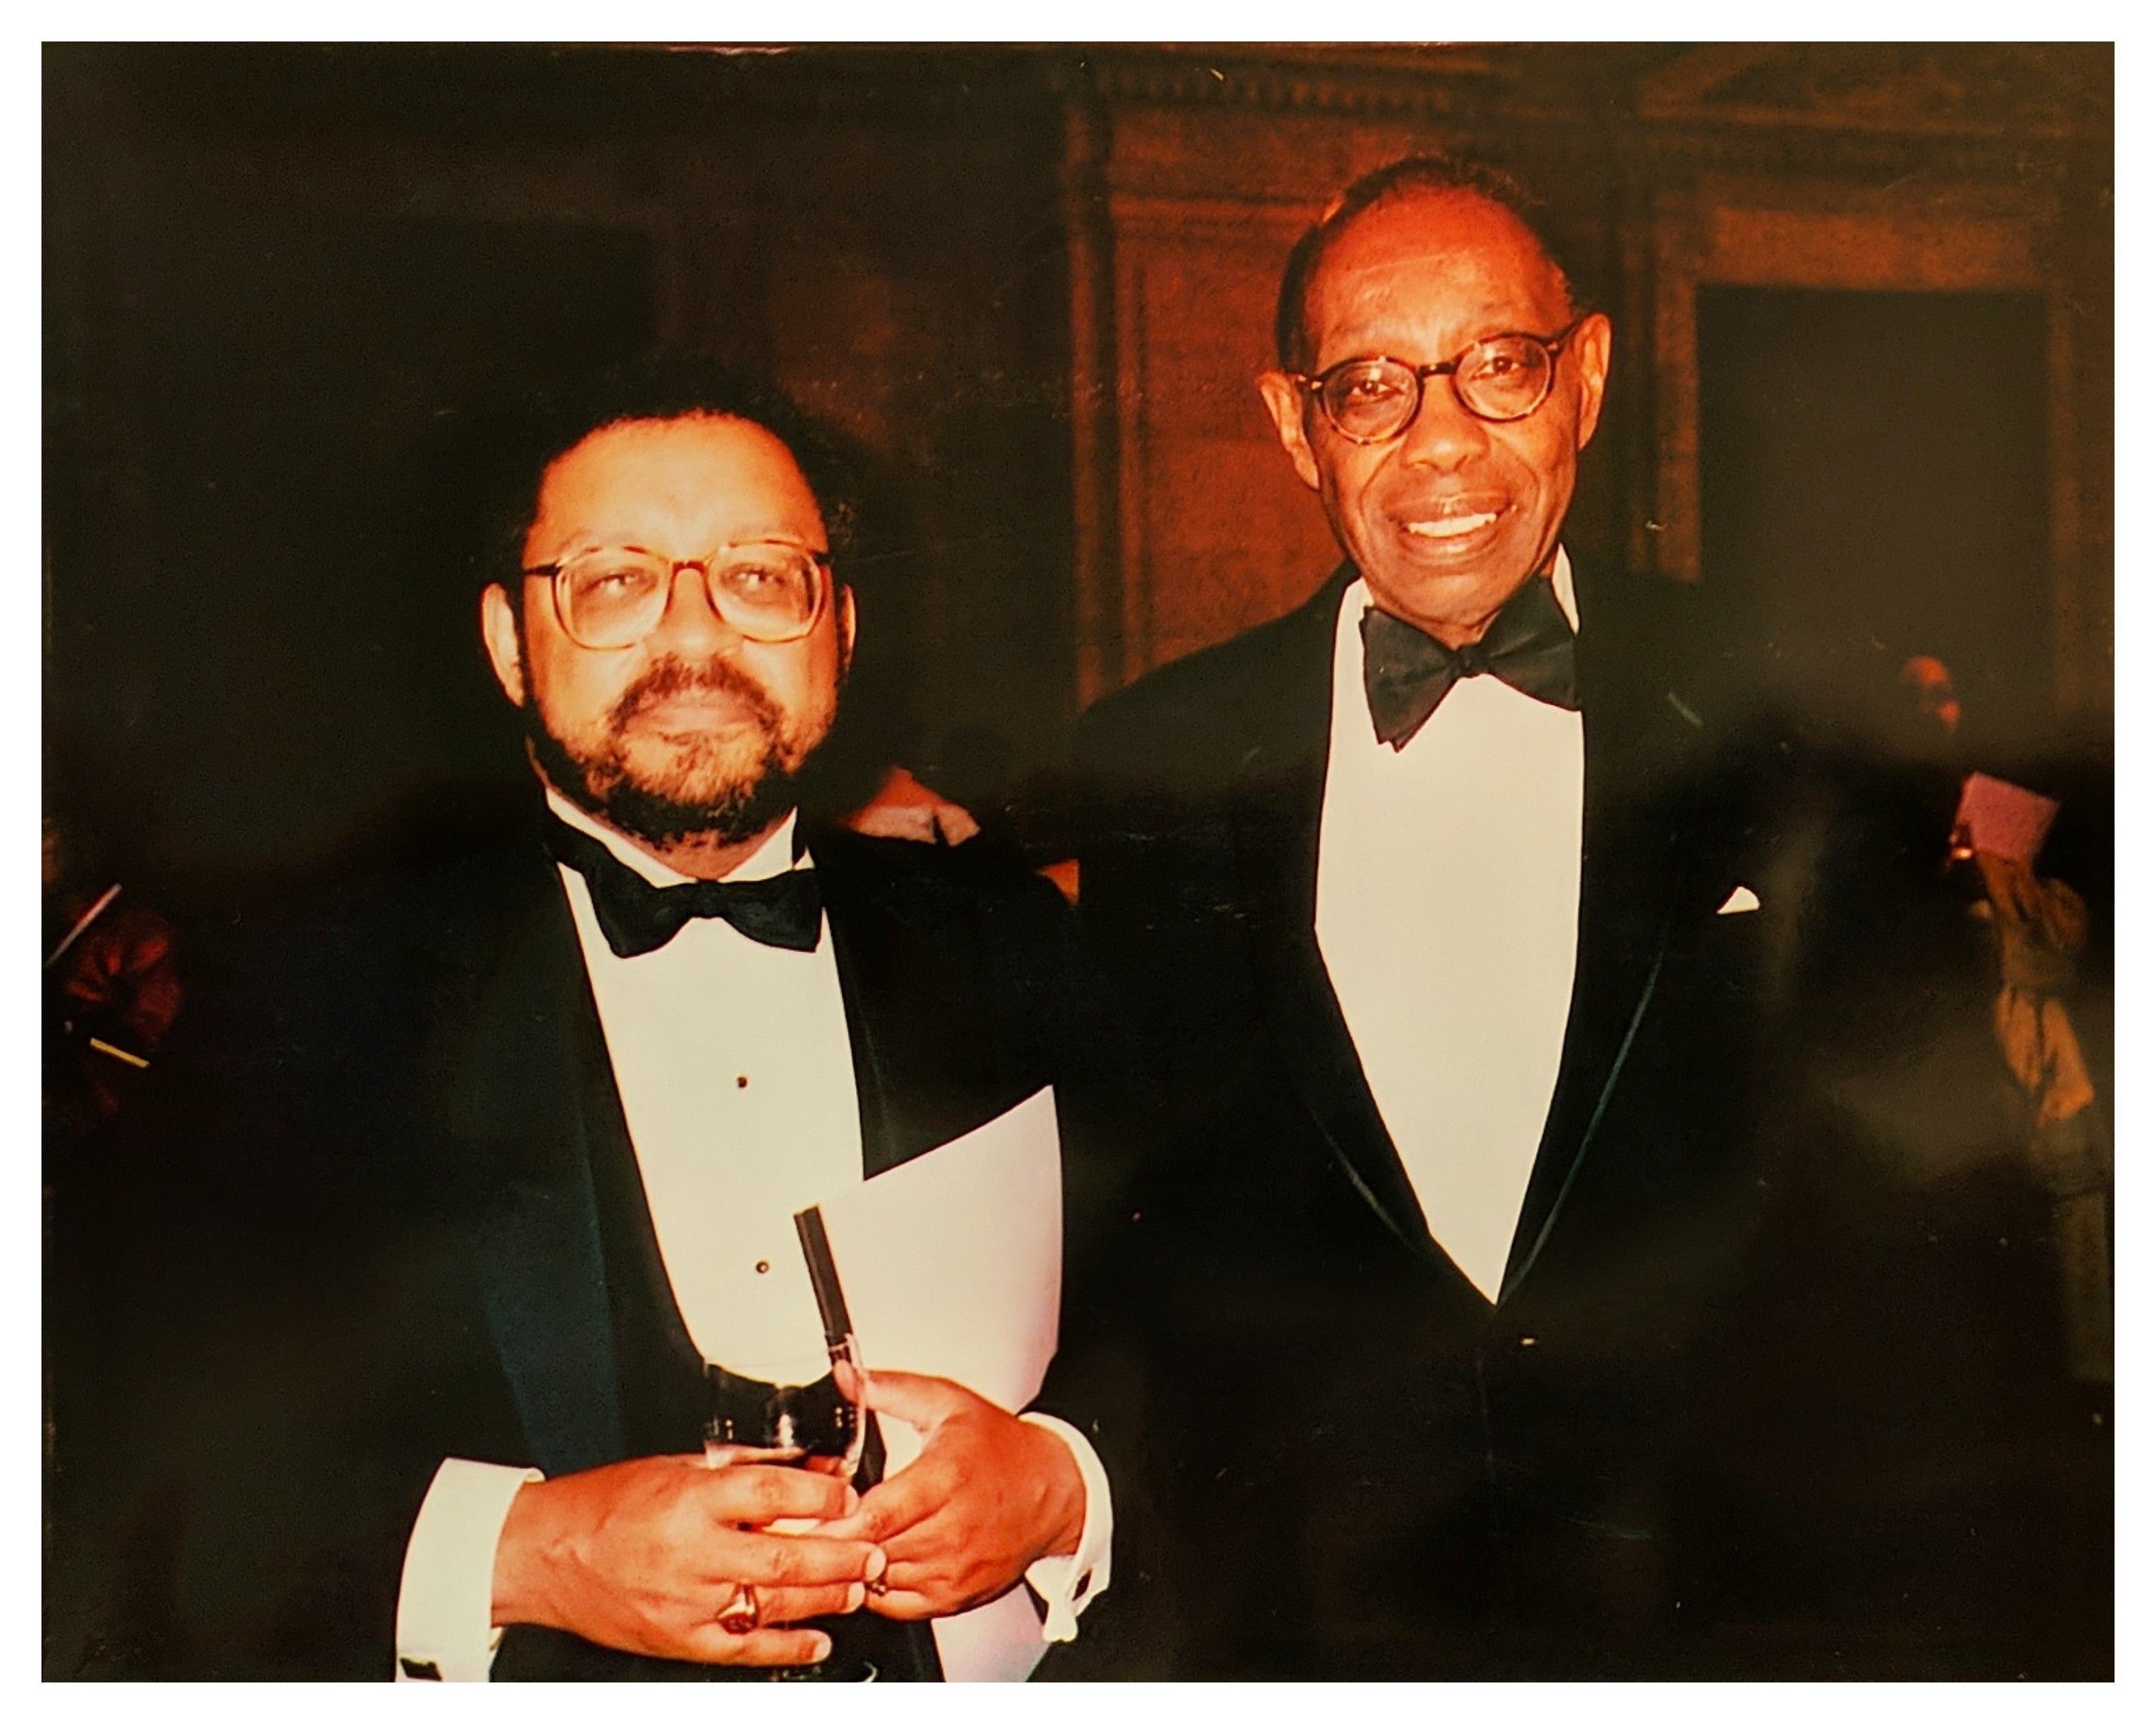 Dr. Terry standing with George Walker